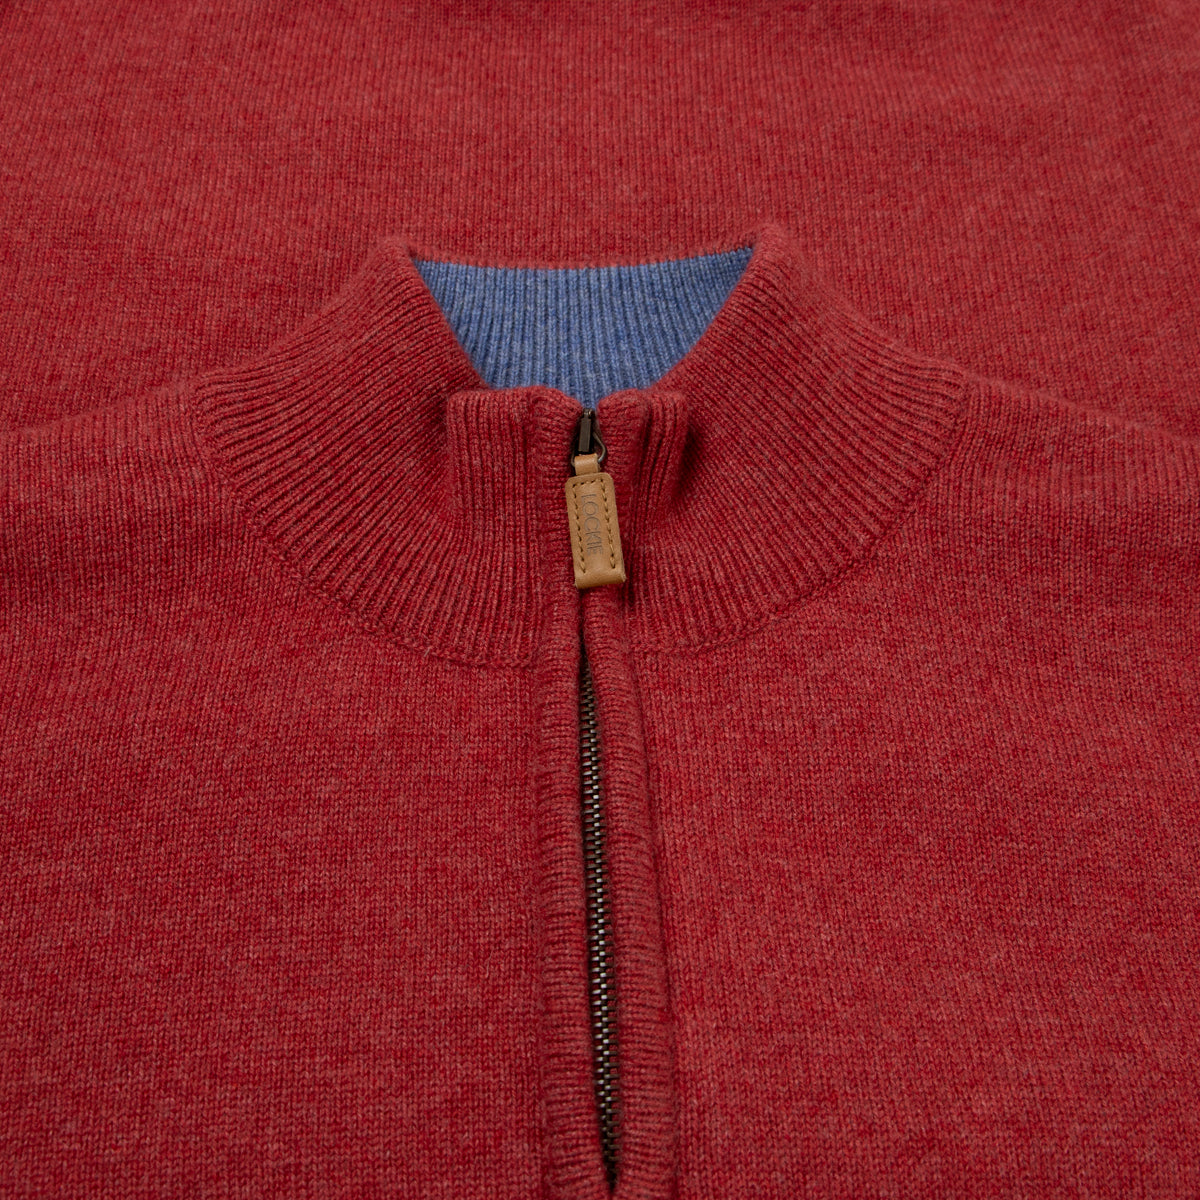 The Bowmore 1/4 Zip Neck Cashmere Sweater - Poppy / Lapis  Robert Old   